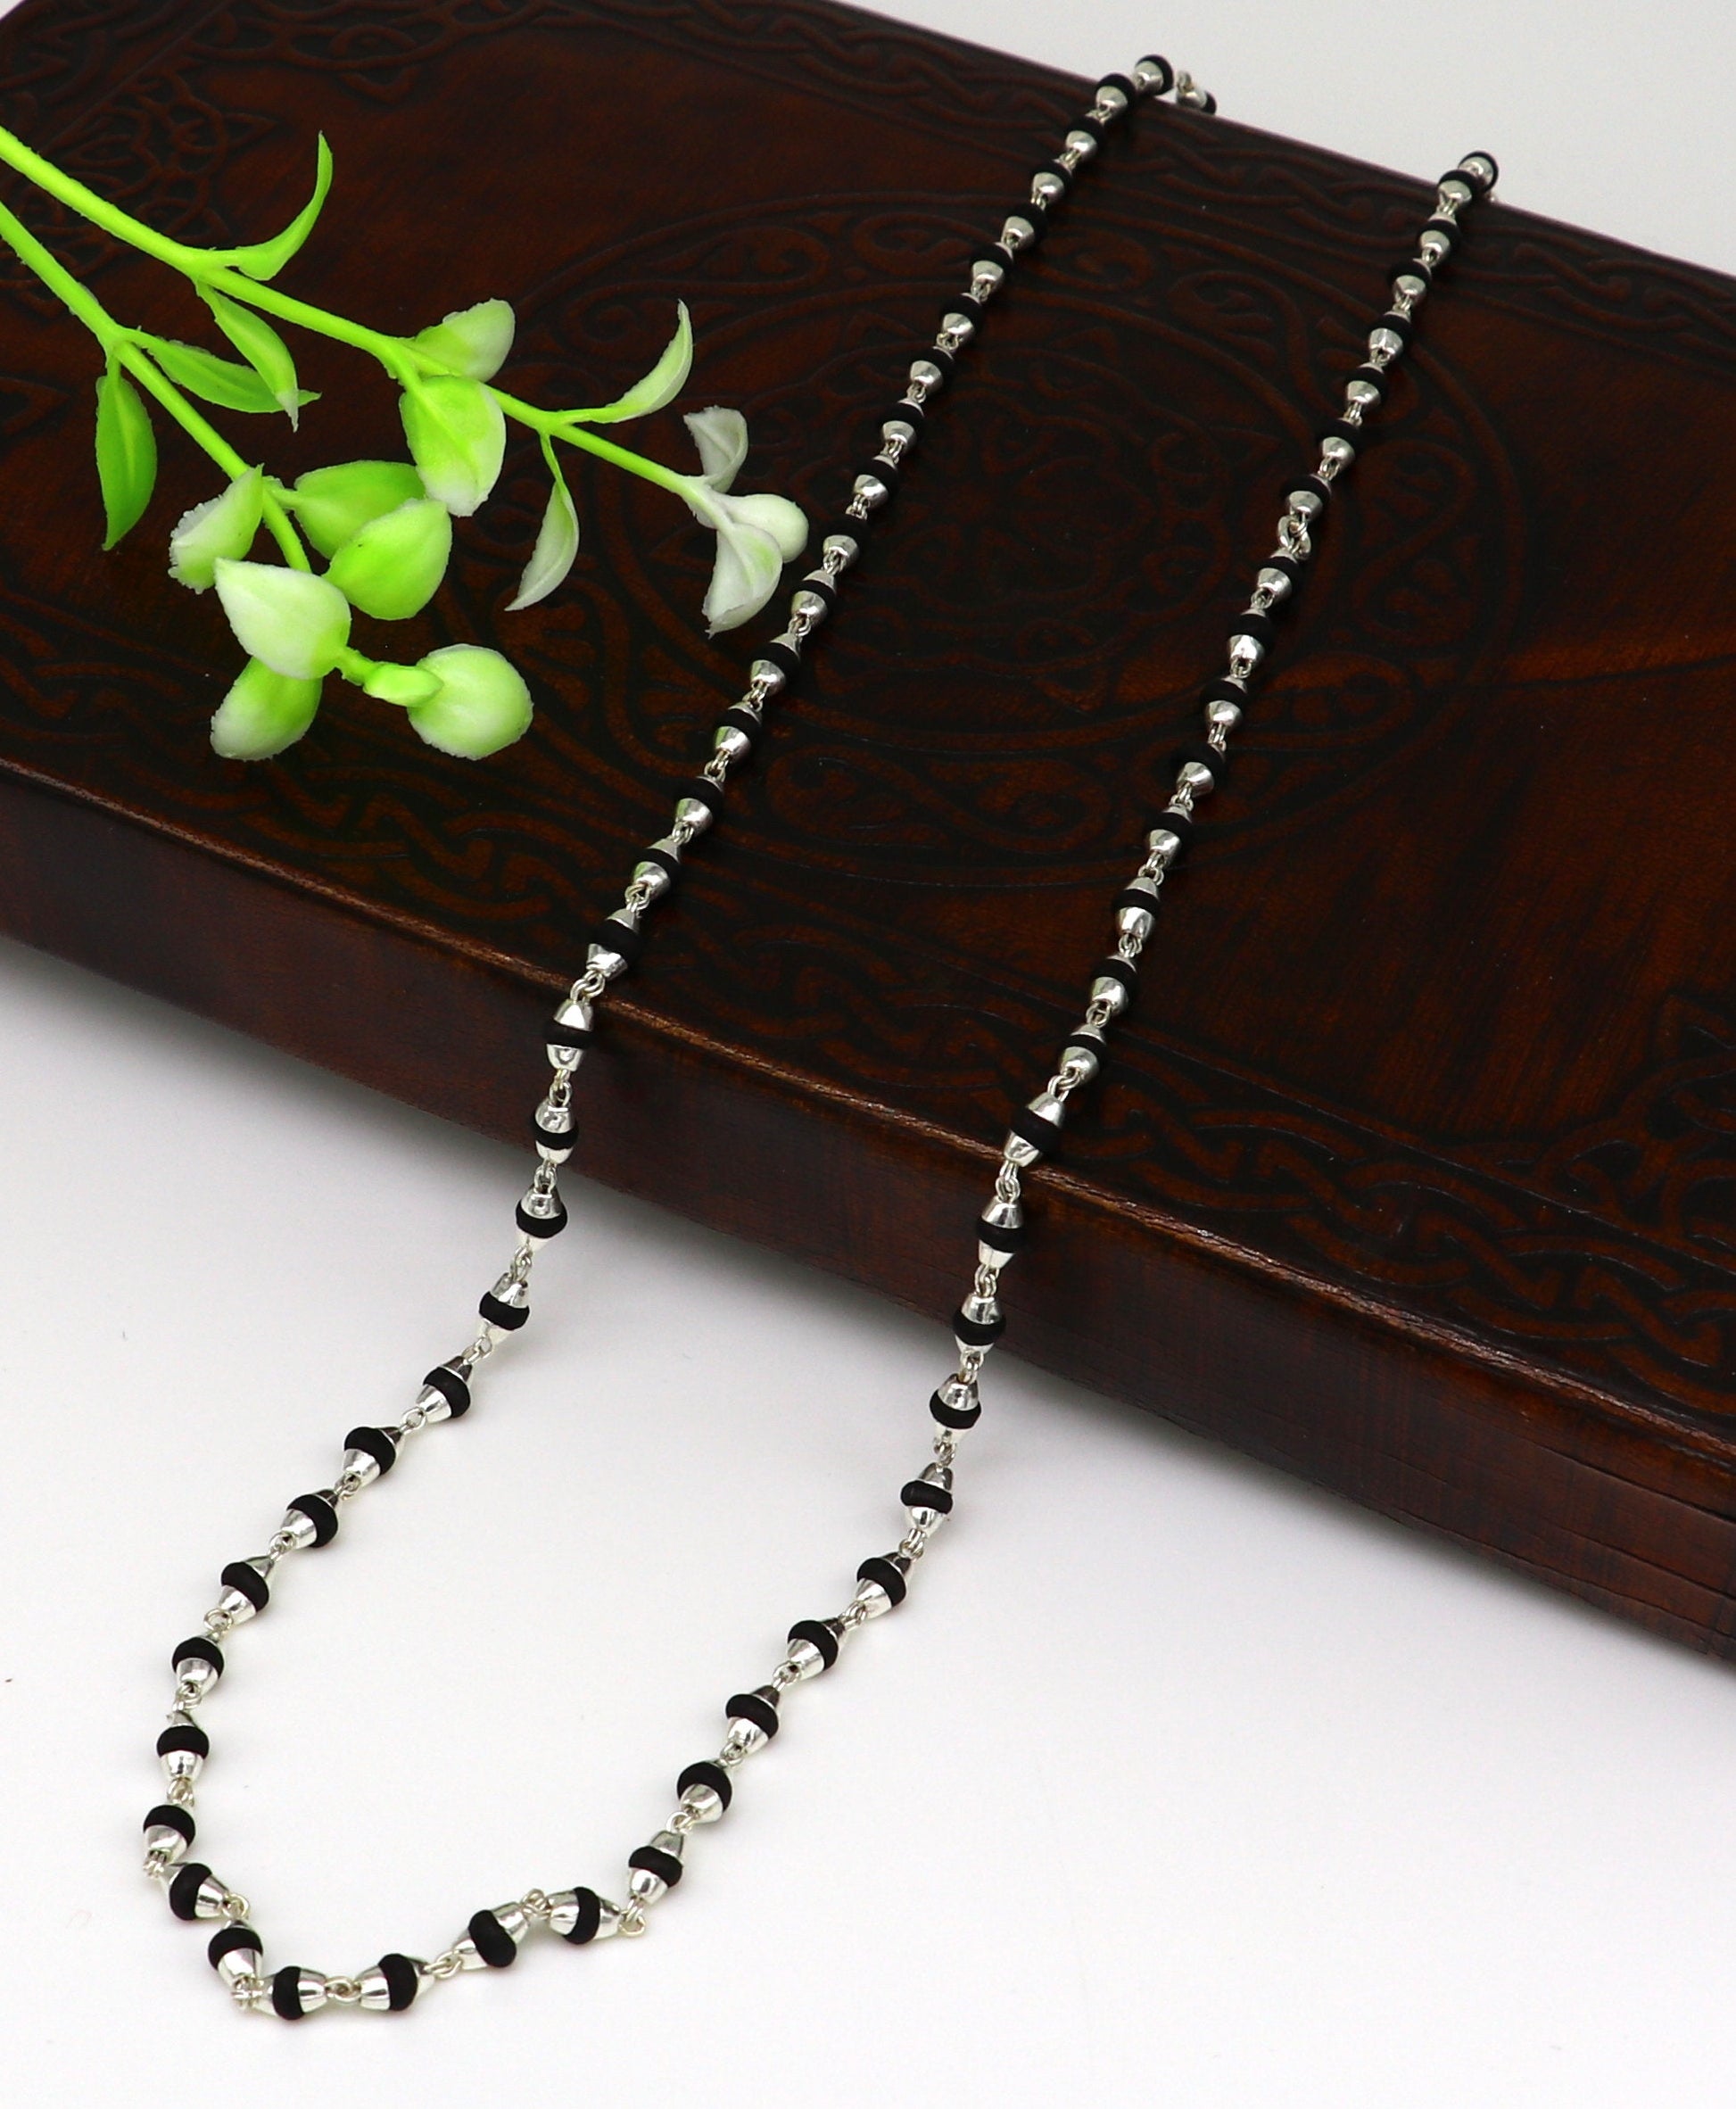 925 sterling silver black basil rosary wooden beads 4mm solid chain necklace, excellent 24" unisex stylish necklace from india ch103 - TRIBAL ORNAMENTS